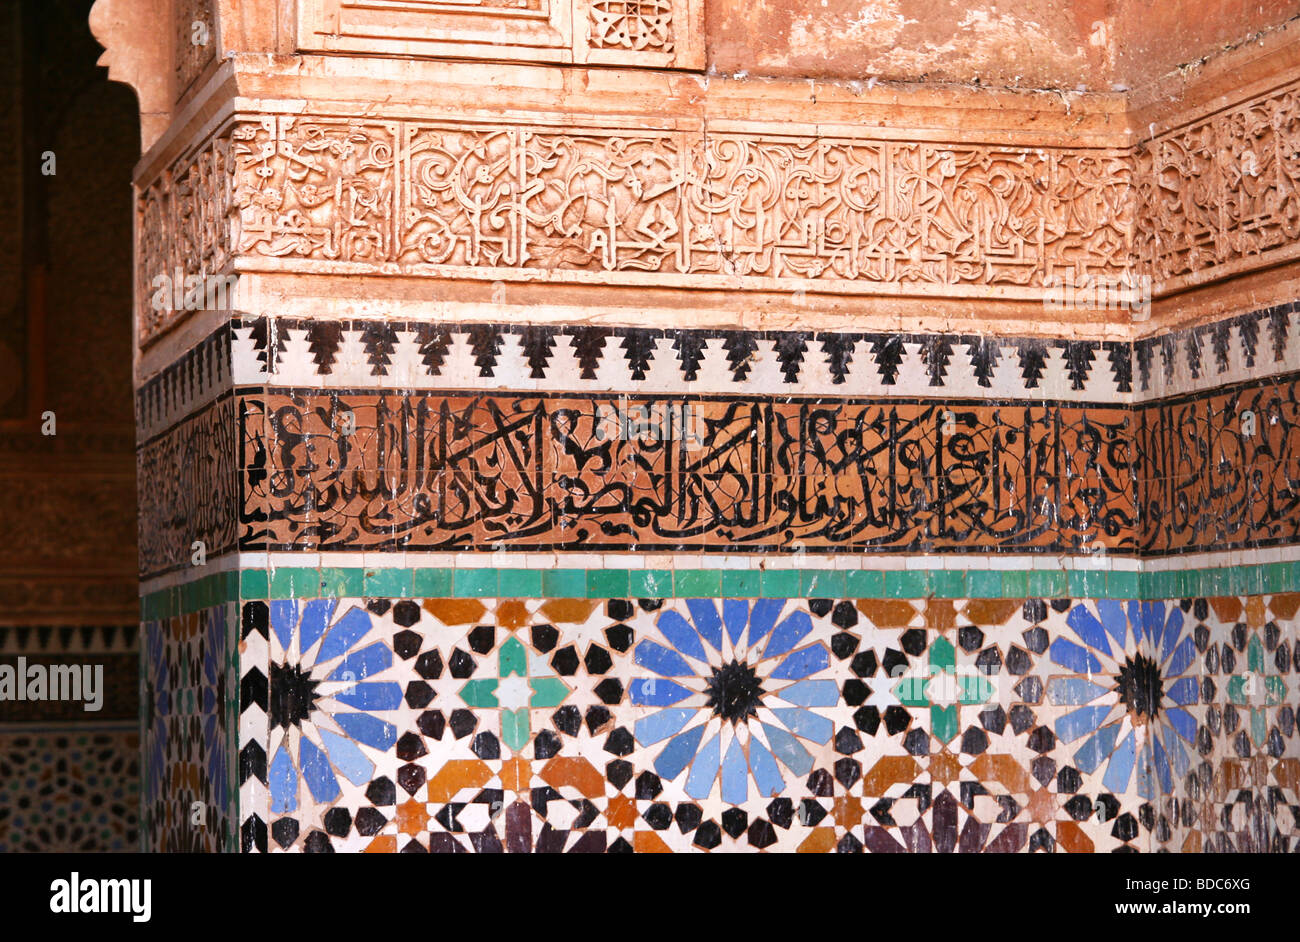 Colorful Islamic tiles, Arabic calligraphy and stucco designs in the Saadian Tombs,  Marrakesh, Morocco (16th century) Stock Photo